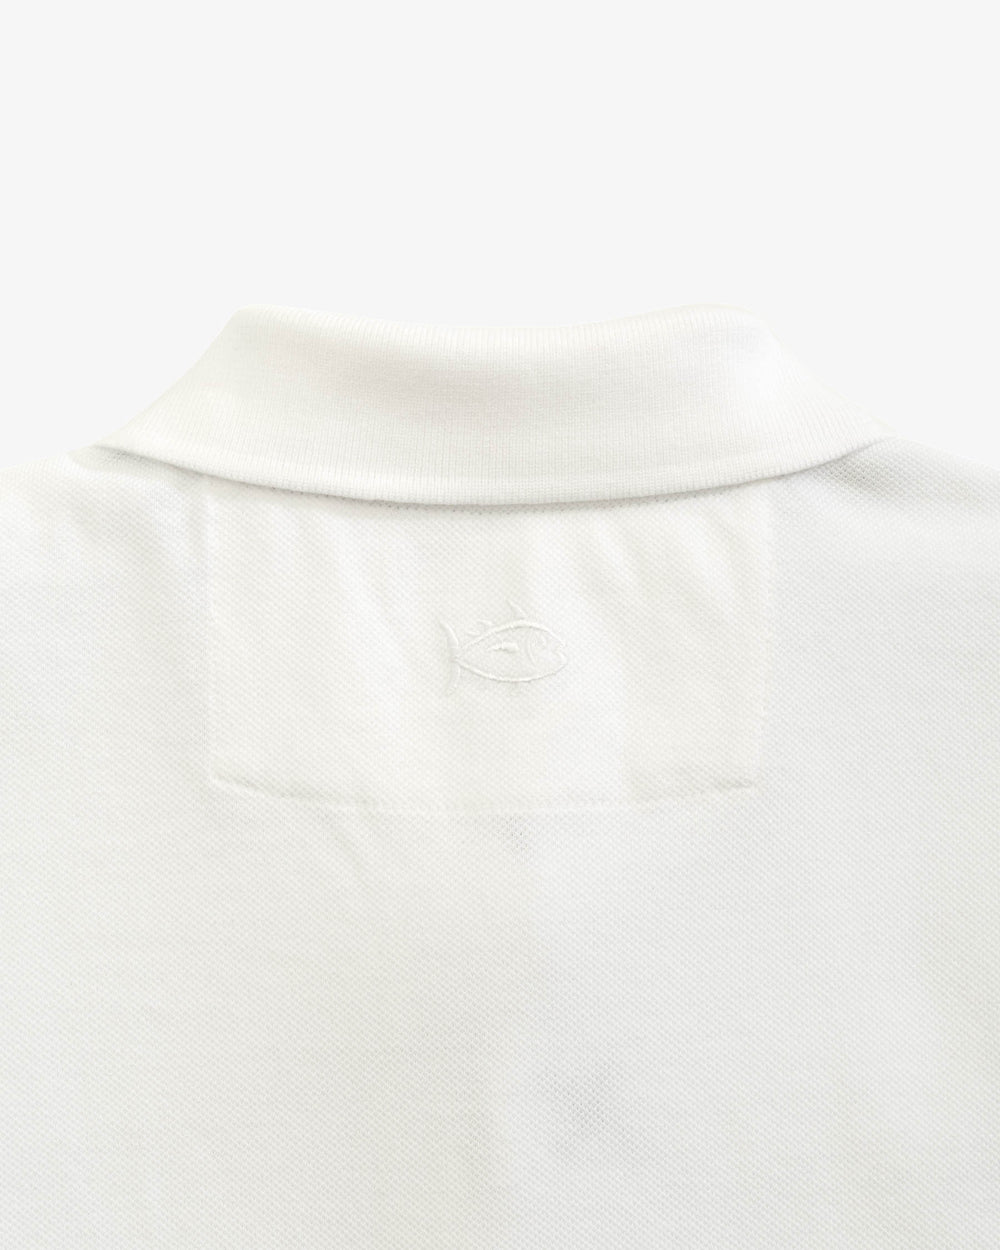 The yoke view of the Georgia Bulldogs New Short Sleeve Skipjack Polo by Southern Tide - Classic White